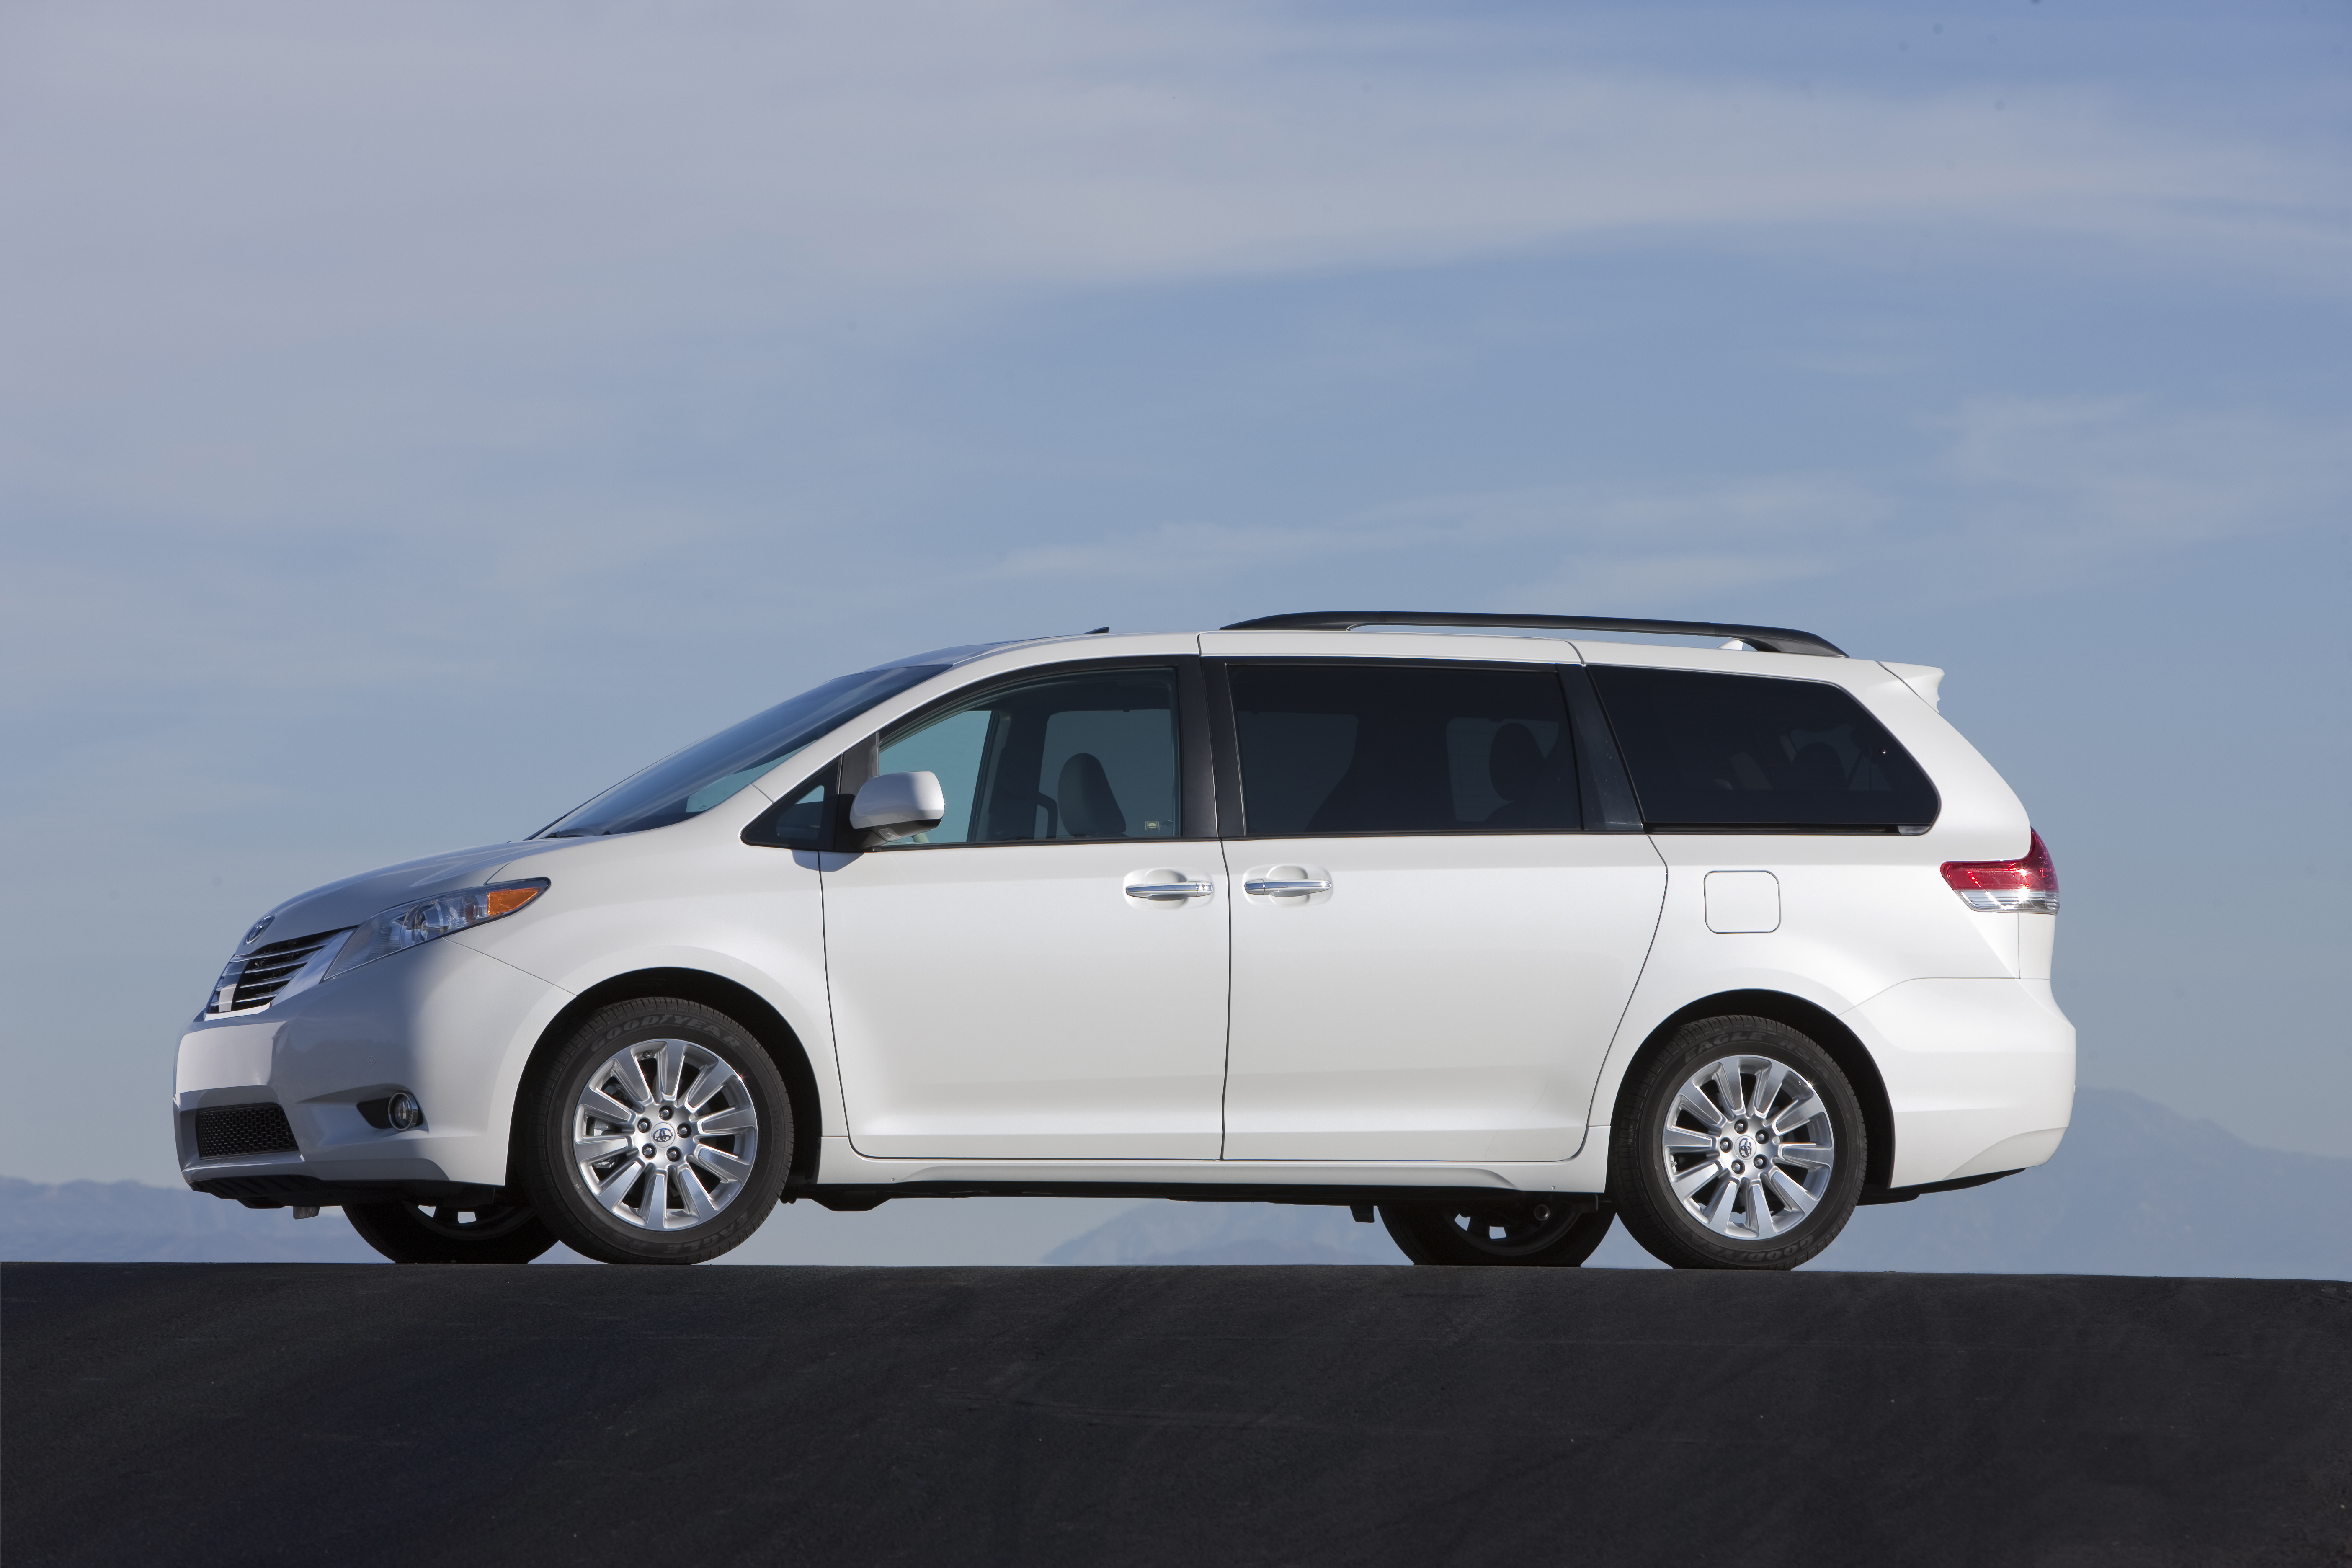 Toyota Recalling 744,000 Sienna Minivans Because Doors Can Open While Driving